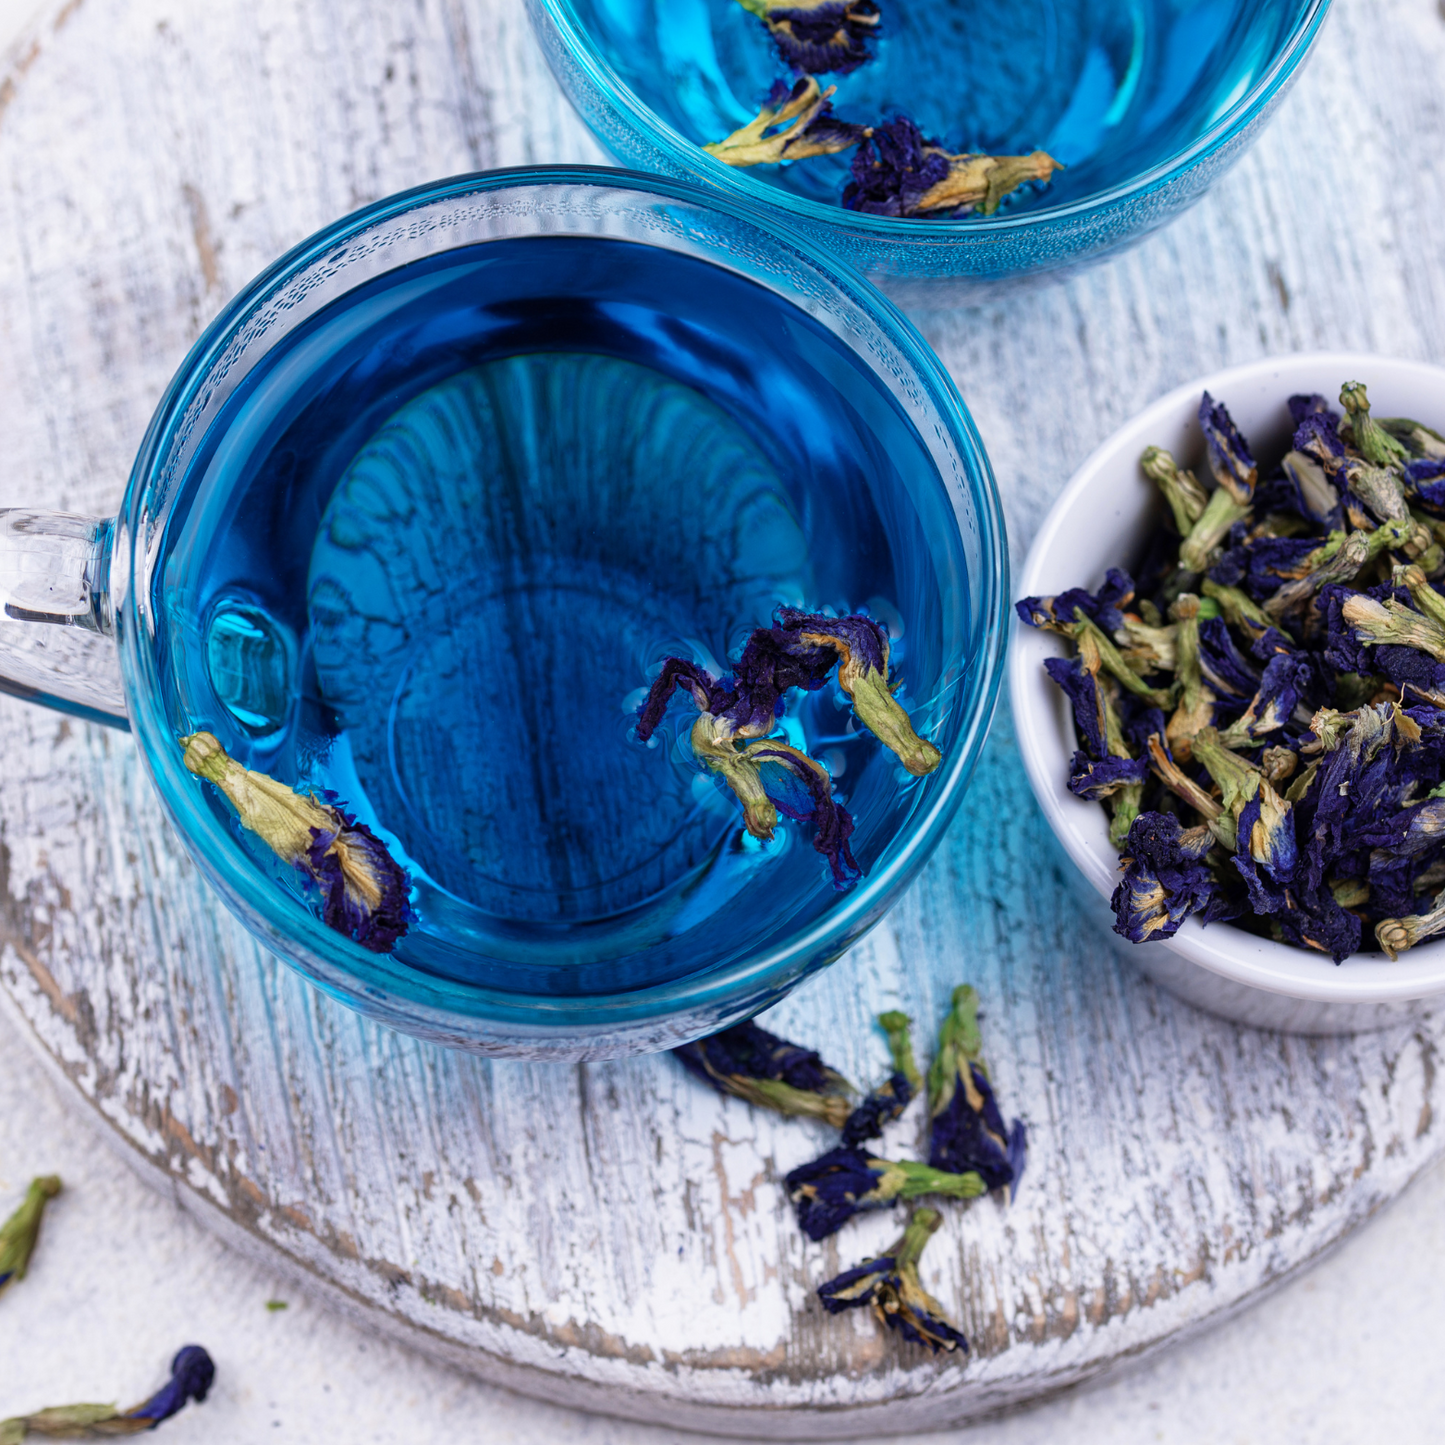 Witchy Pooh's Butterfly Pea Flower Loose Leaf Herbal Blue Colored Tea, Add Lime to Turn Purple!